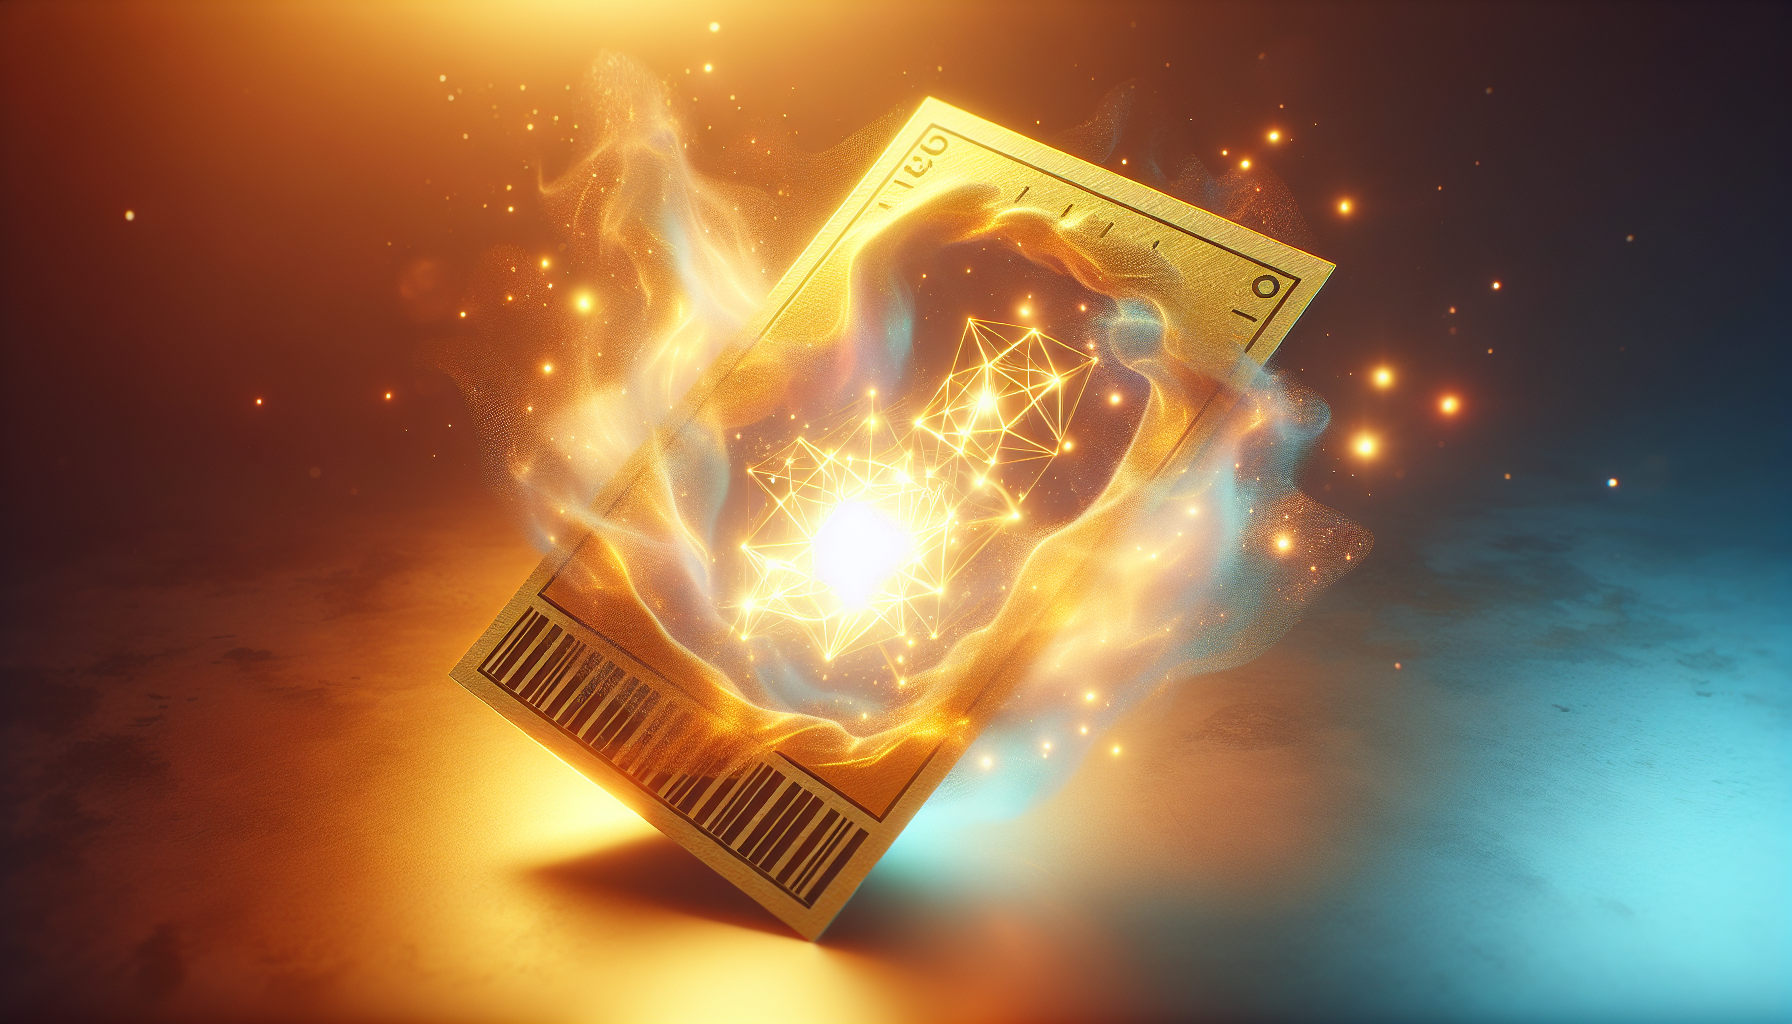 Illustration of a golden lottery ticket with radiant light